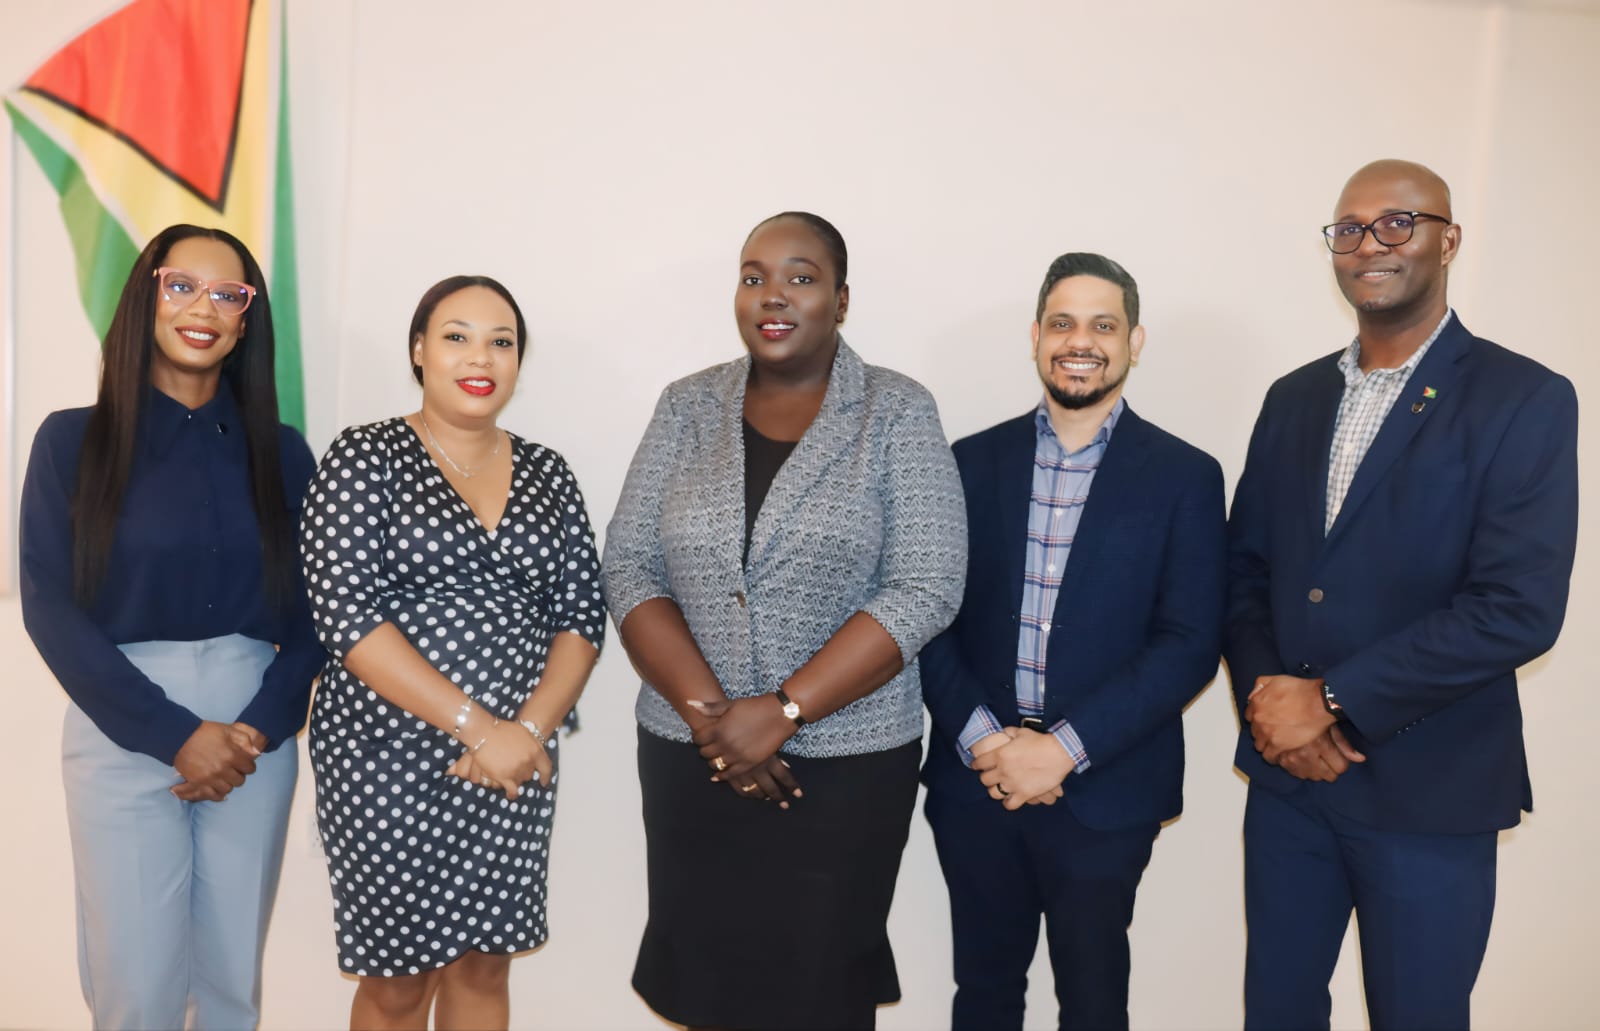 GCCI meets with Caribbean Export Development Agency senior officials, discusses collaboration on upcoming Caribbean Investment Forum